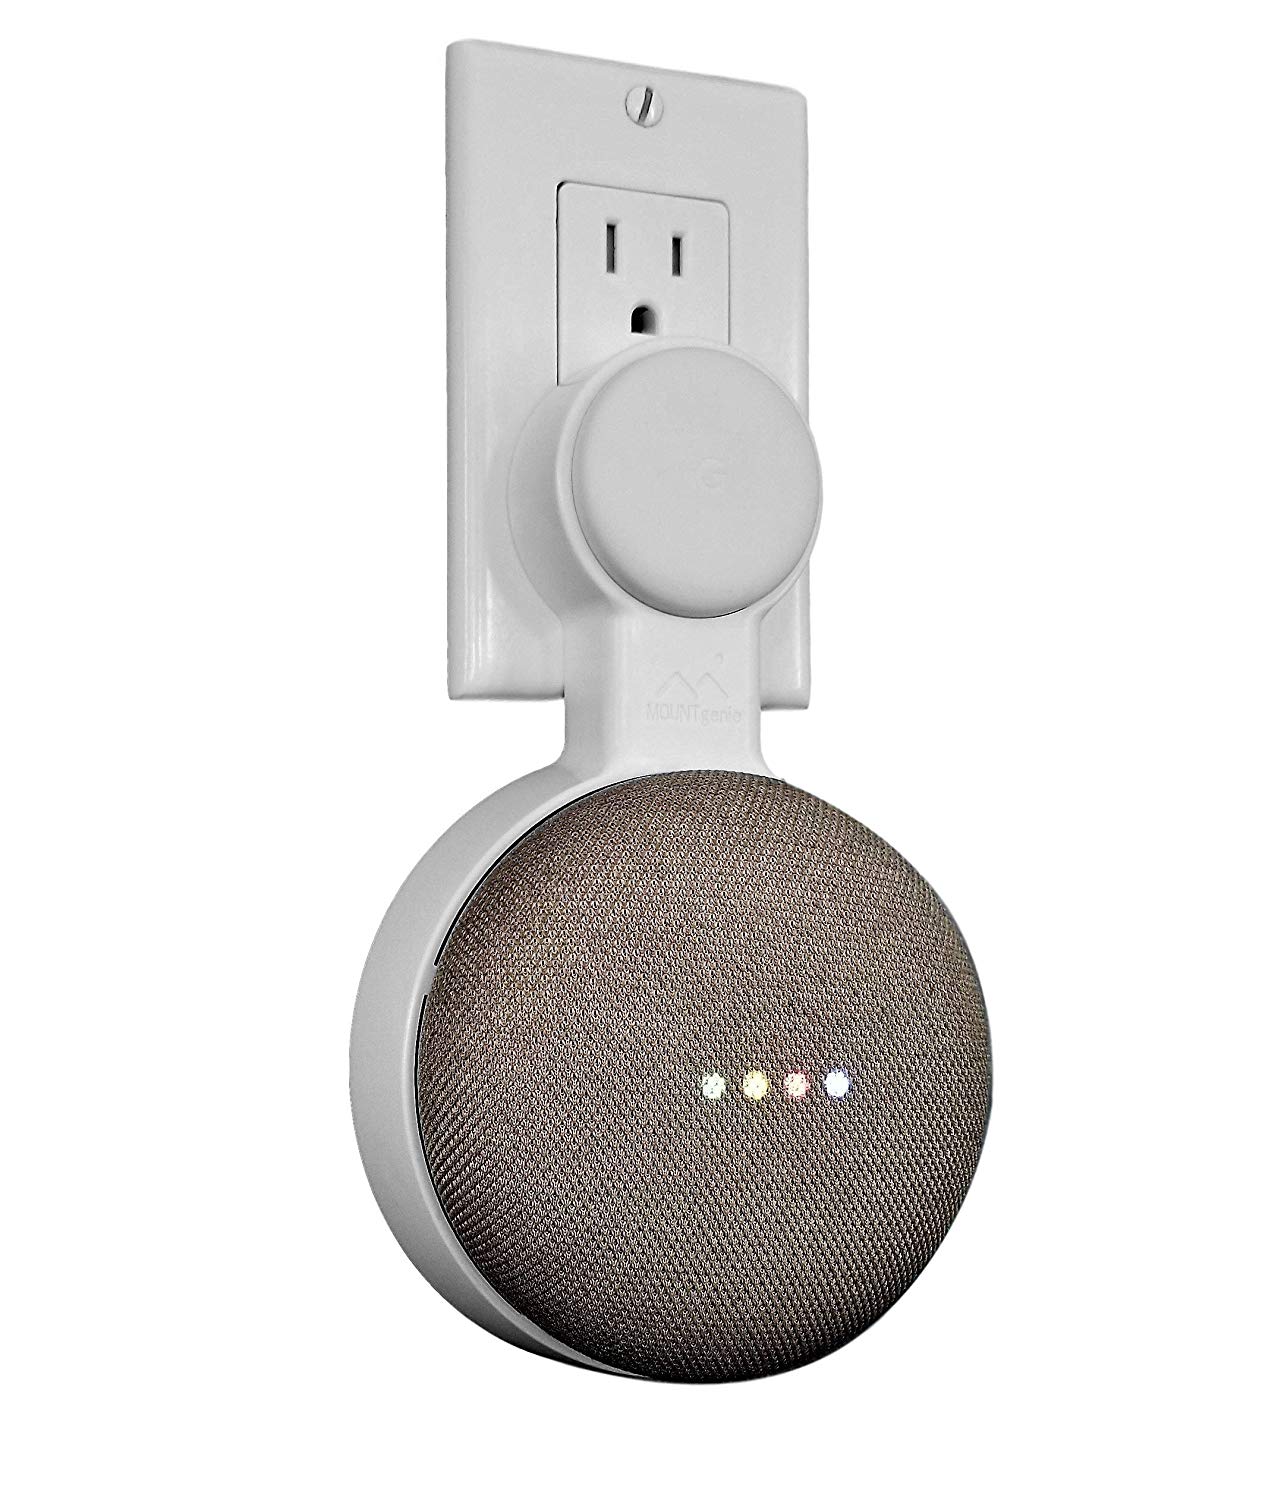 Mount Stand Hanger Holder For Google Home Mini Voice NICE Outlet Wall Hot  NEW T4K4 